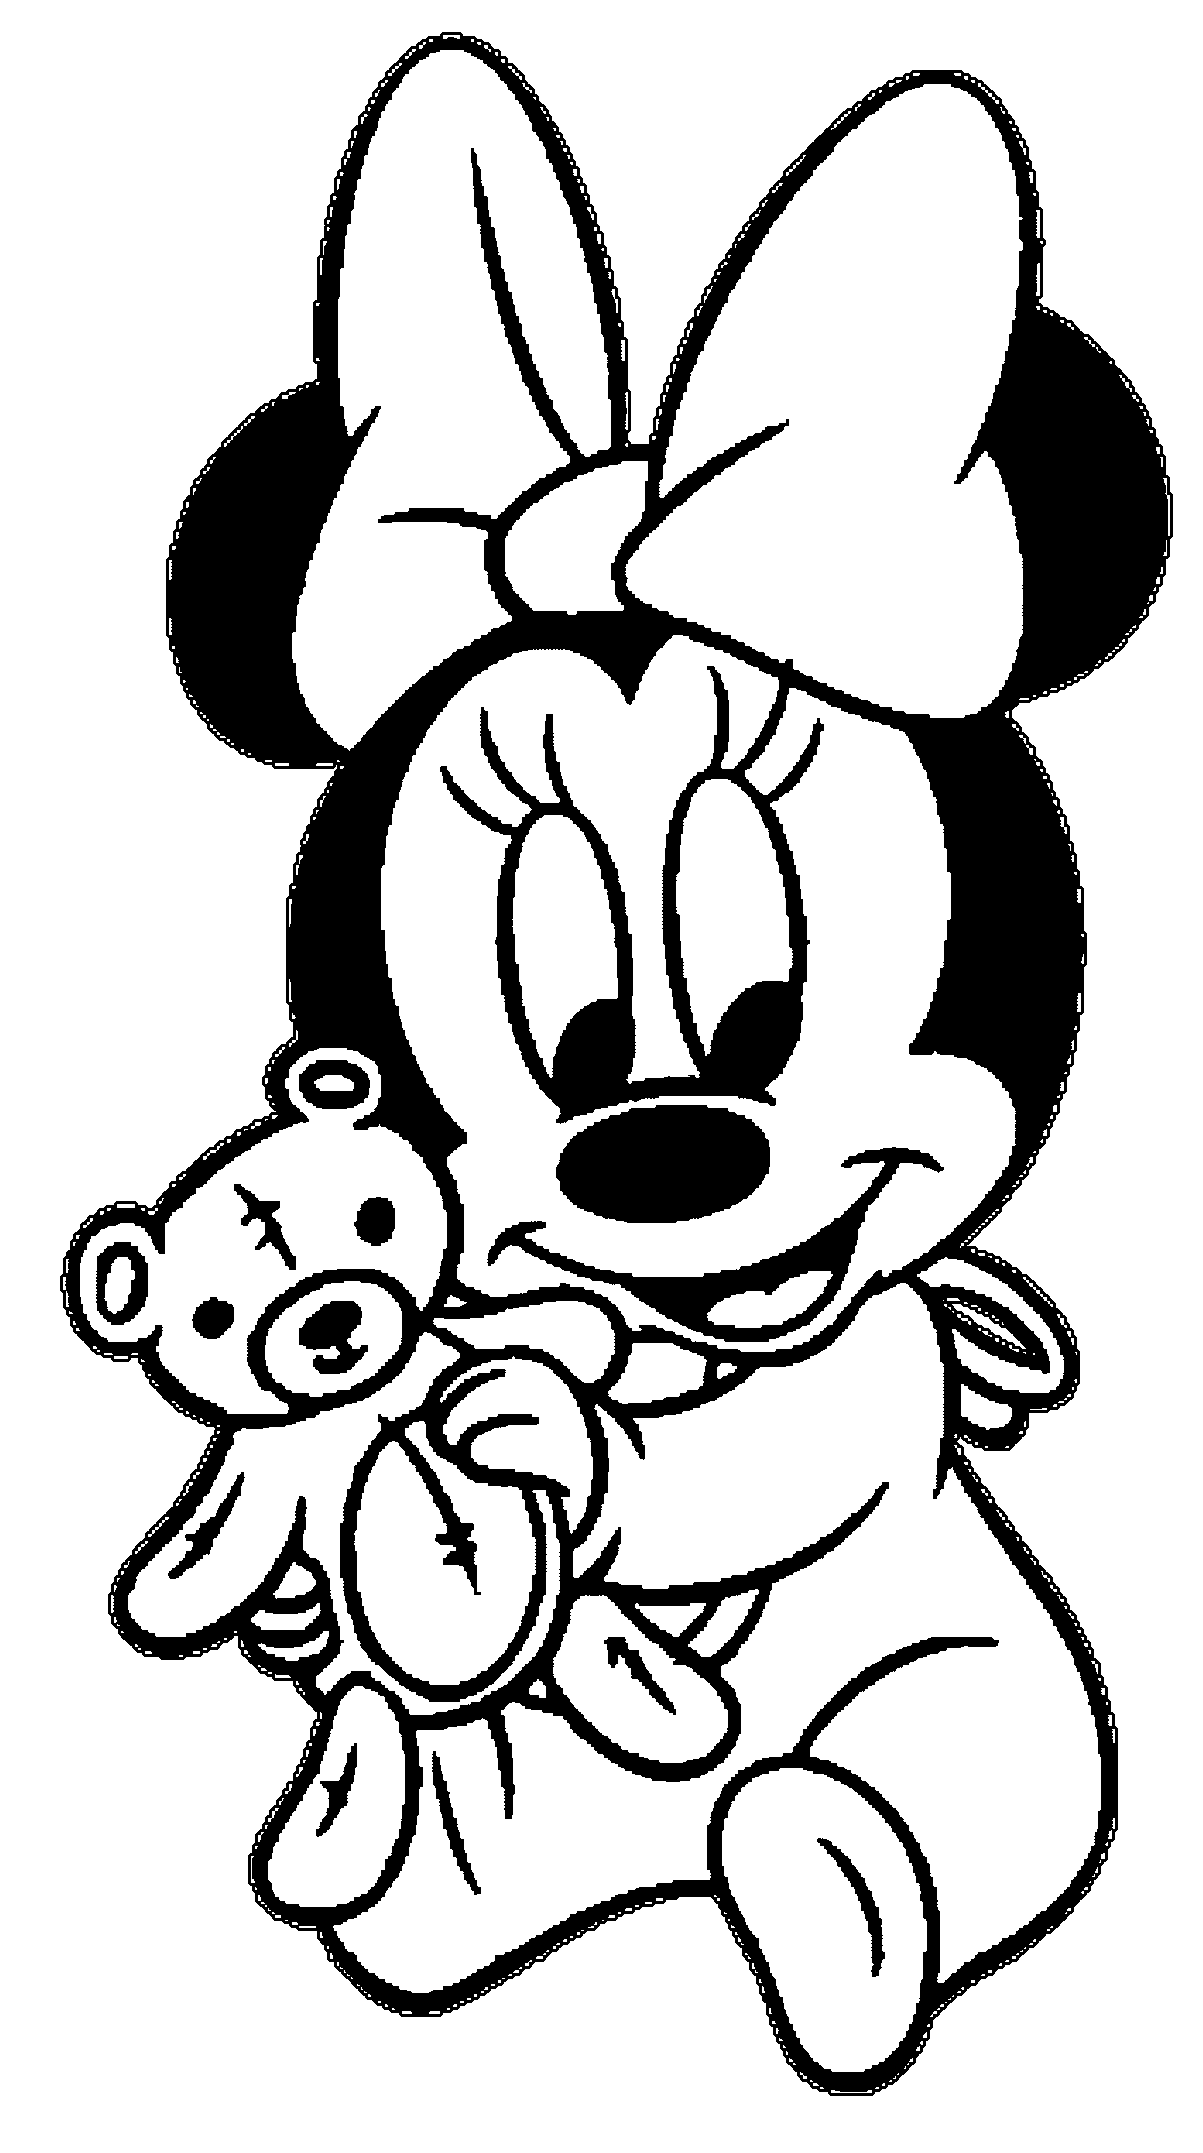 Baby Minnie Teddy Bear Coloring Page Wecoloringpage